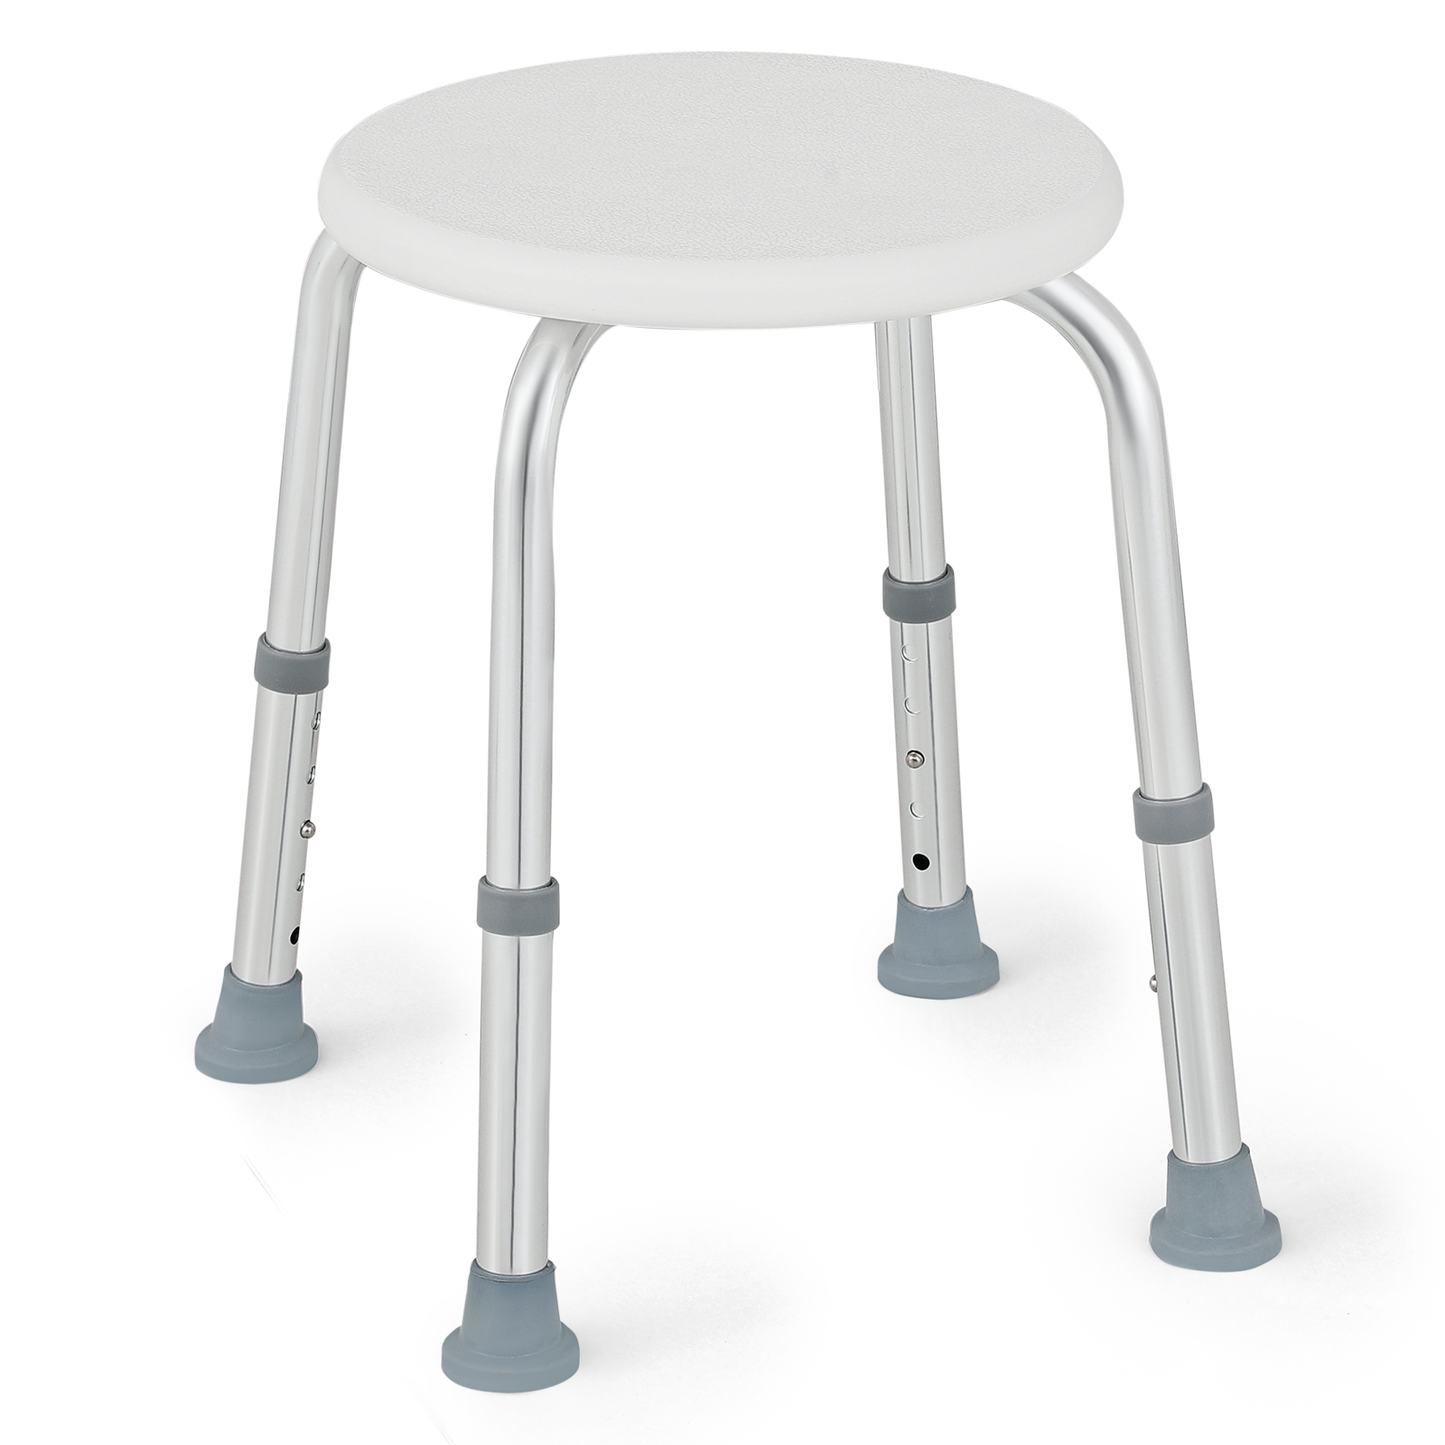 Shower Stool -  15.5''-19.5'' 5 Gears Height Adjustable - Round Seat - White/Silver